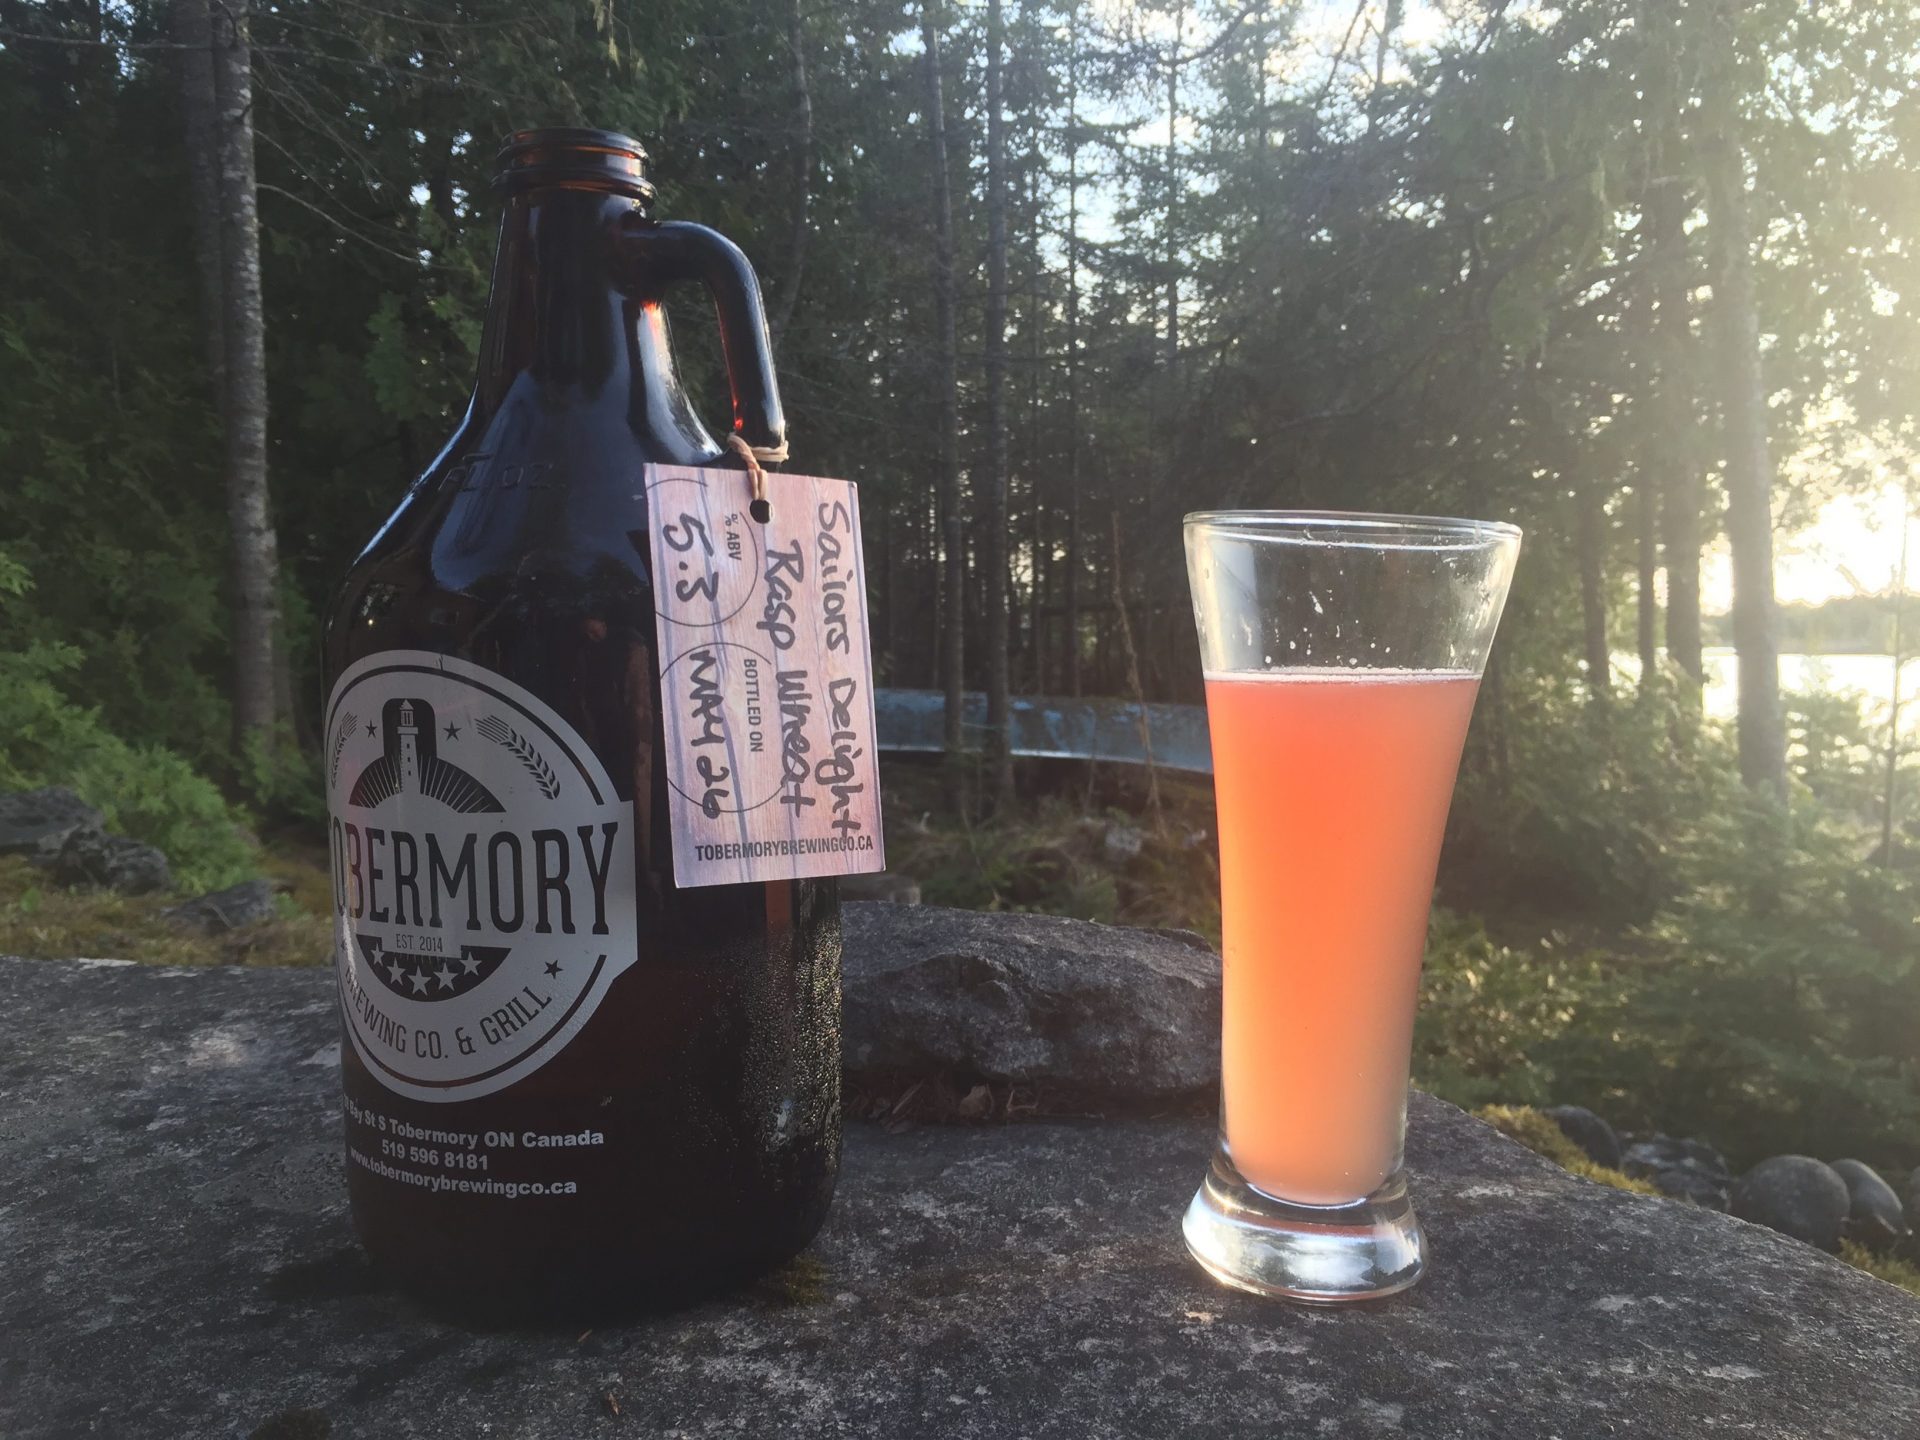 Sitting on the shore of Lake Huron with a growler of Tobermory Brewery's wonderful Sailor's Delight Raspberry Wheat Beer. Sublime.